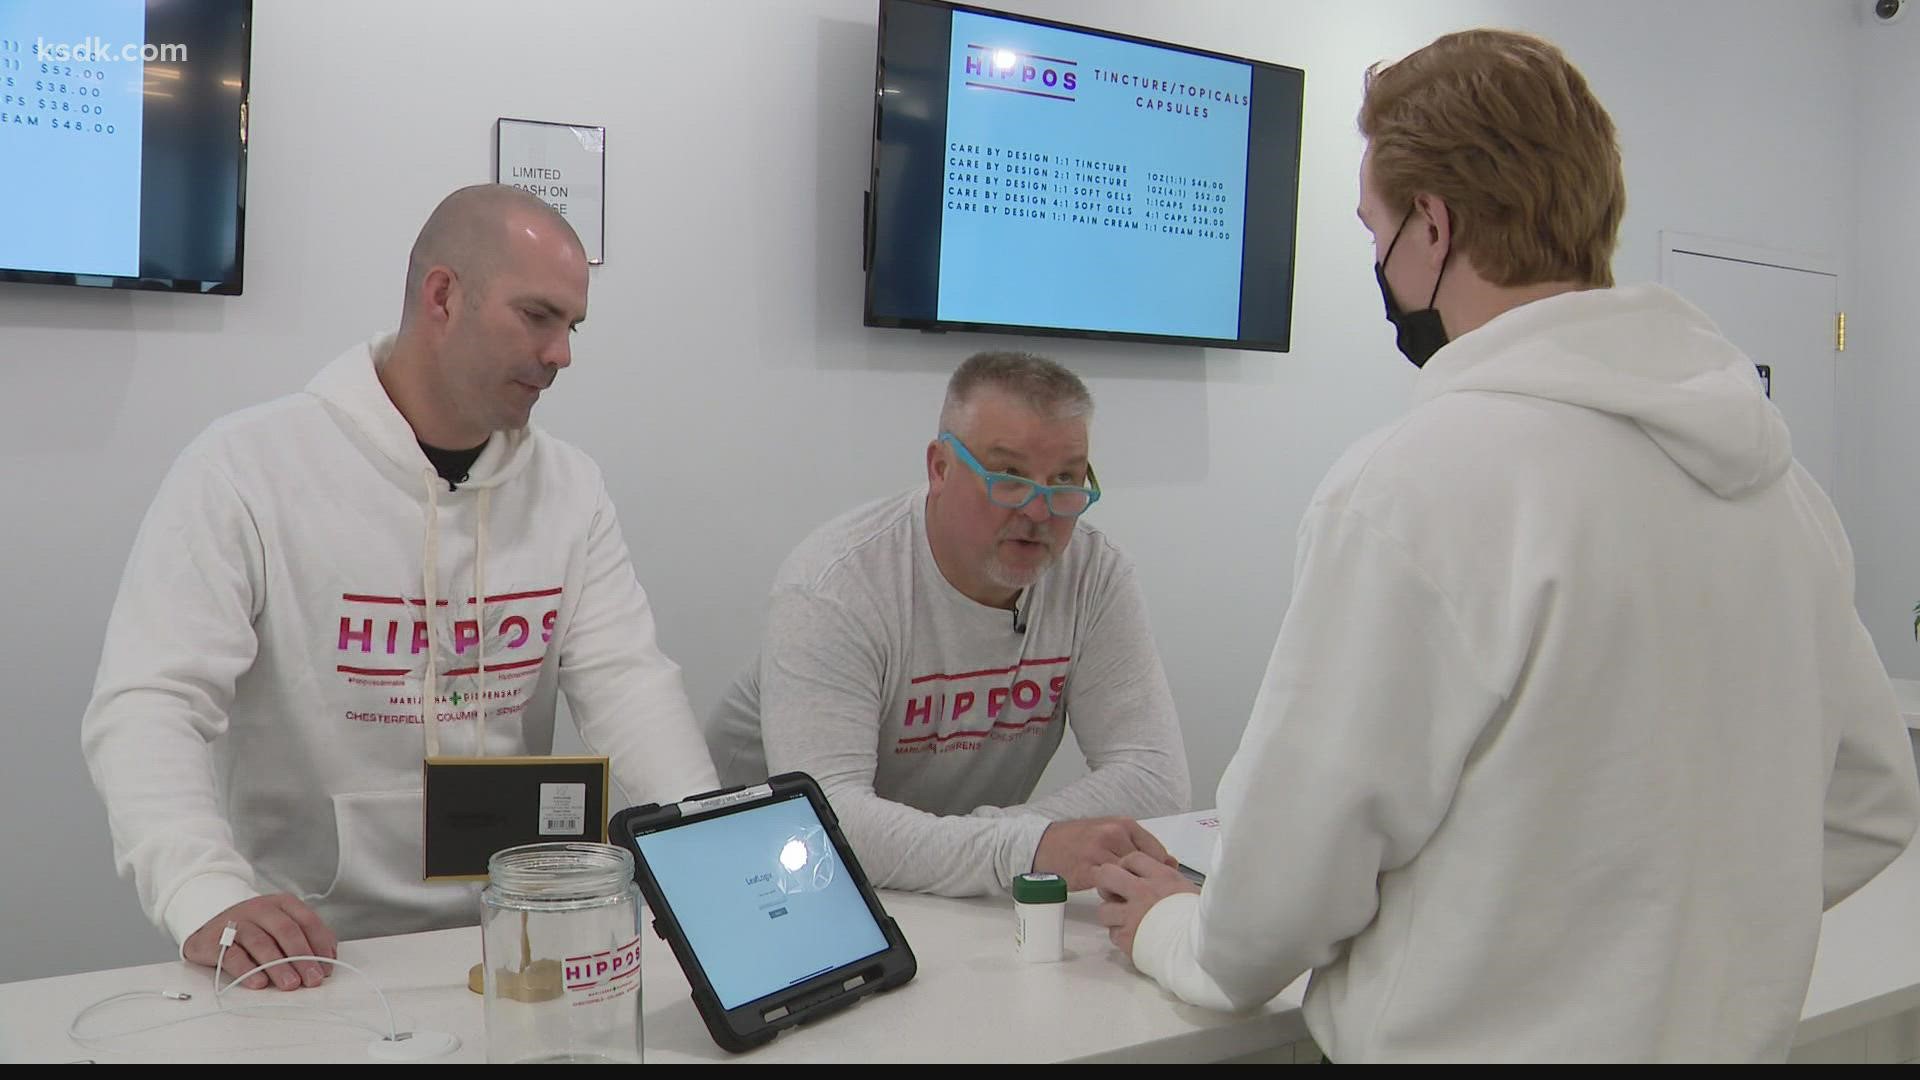 Hull, Chase and Jackman have opened Hippos, a Marijuana dispensary in Chesterfield.